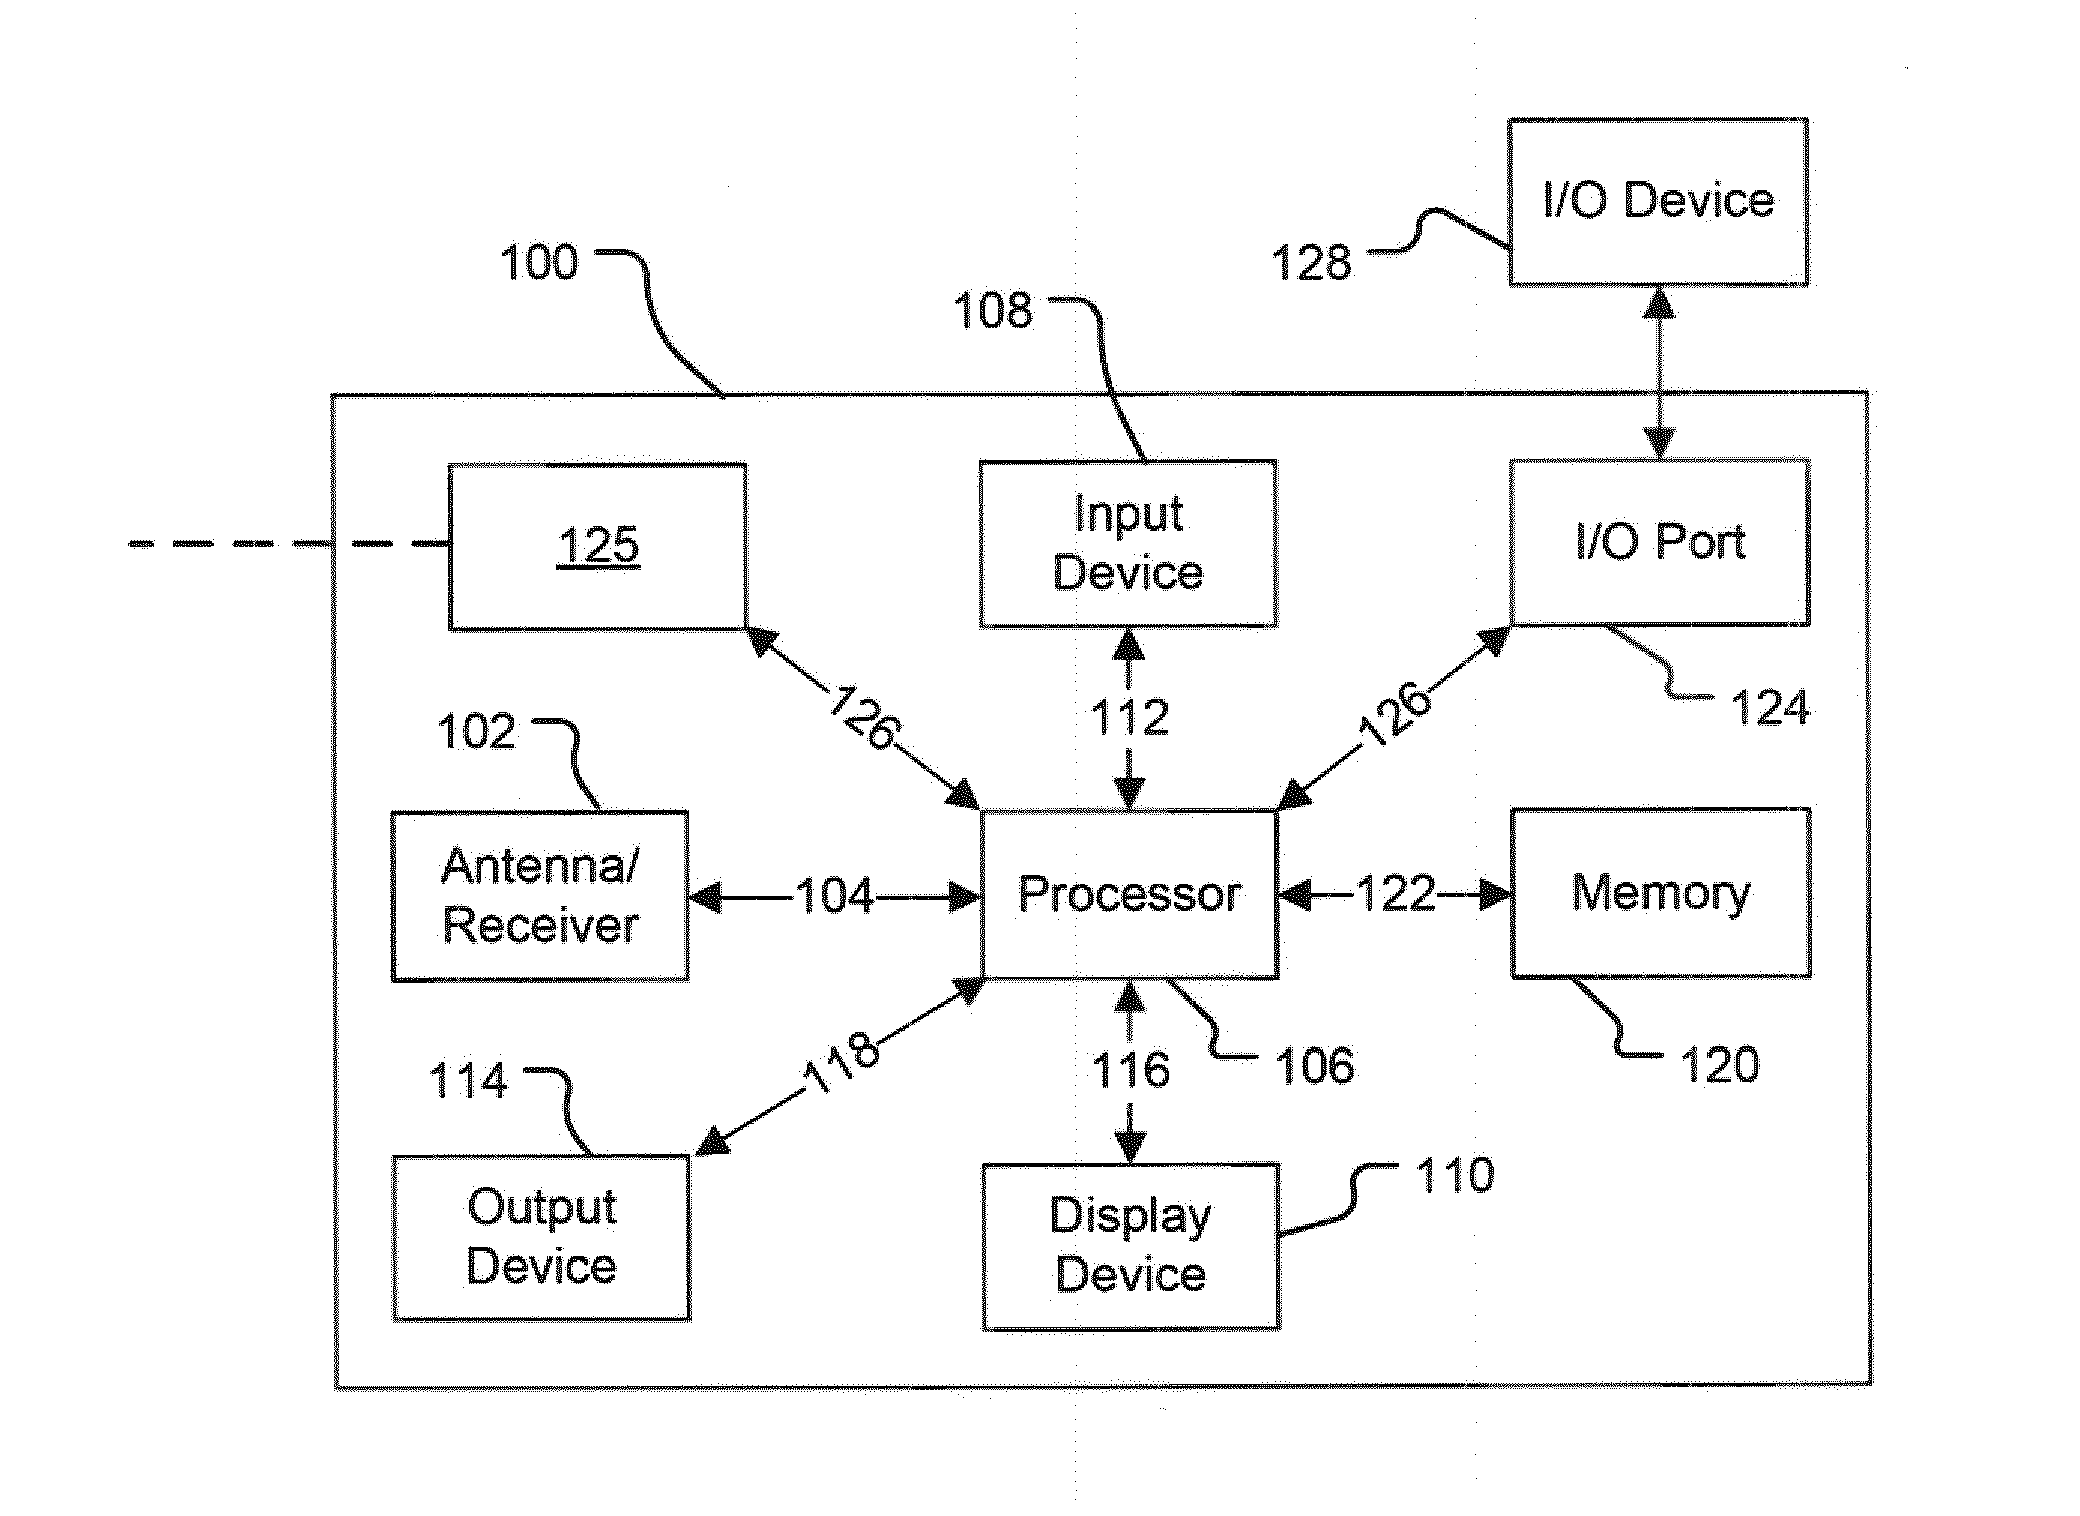 Signal propagation system and method of reducing electromagnetic radiation emissions caused by communication of timing information